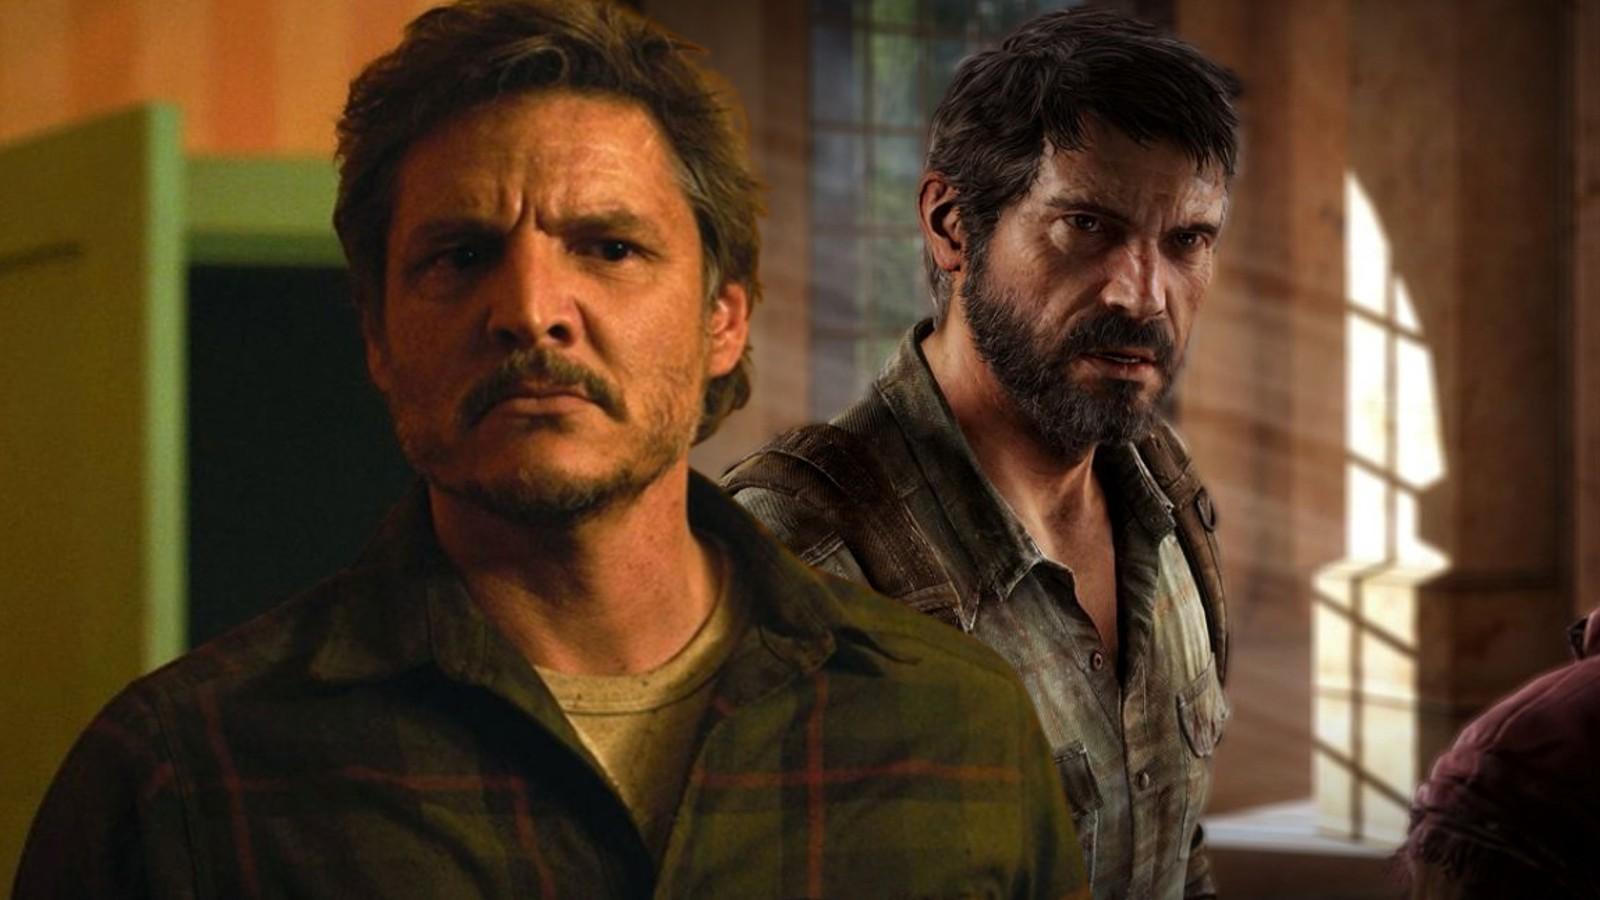 Is Joel The Real Villain Of HBO's 'The Last Of Us'?